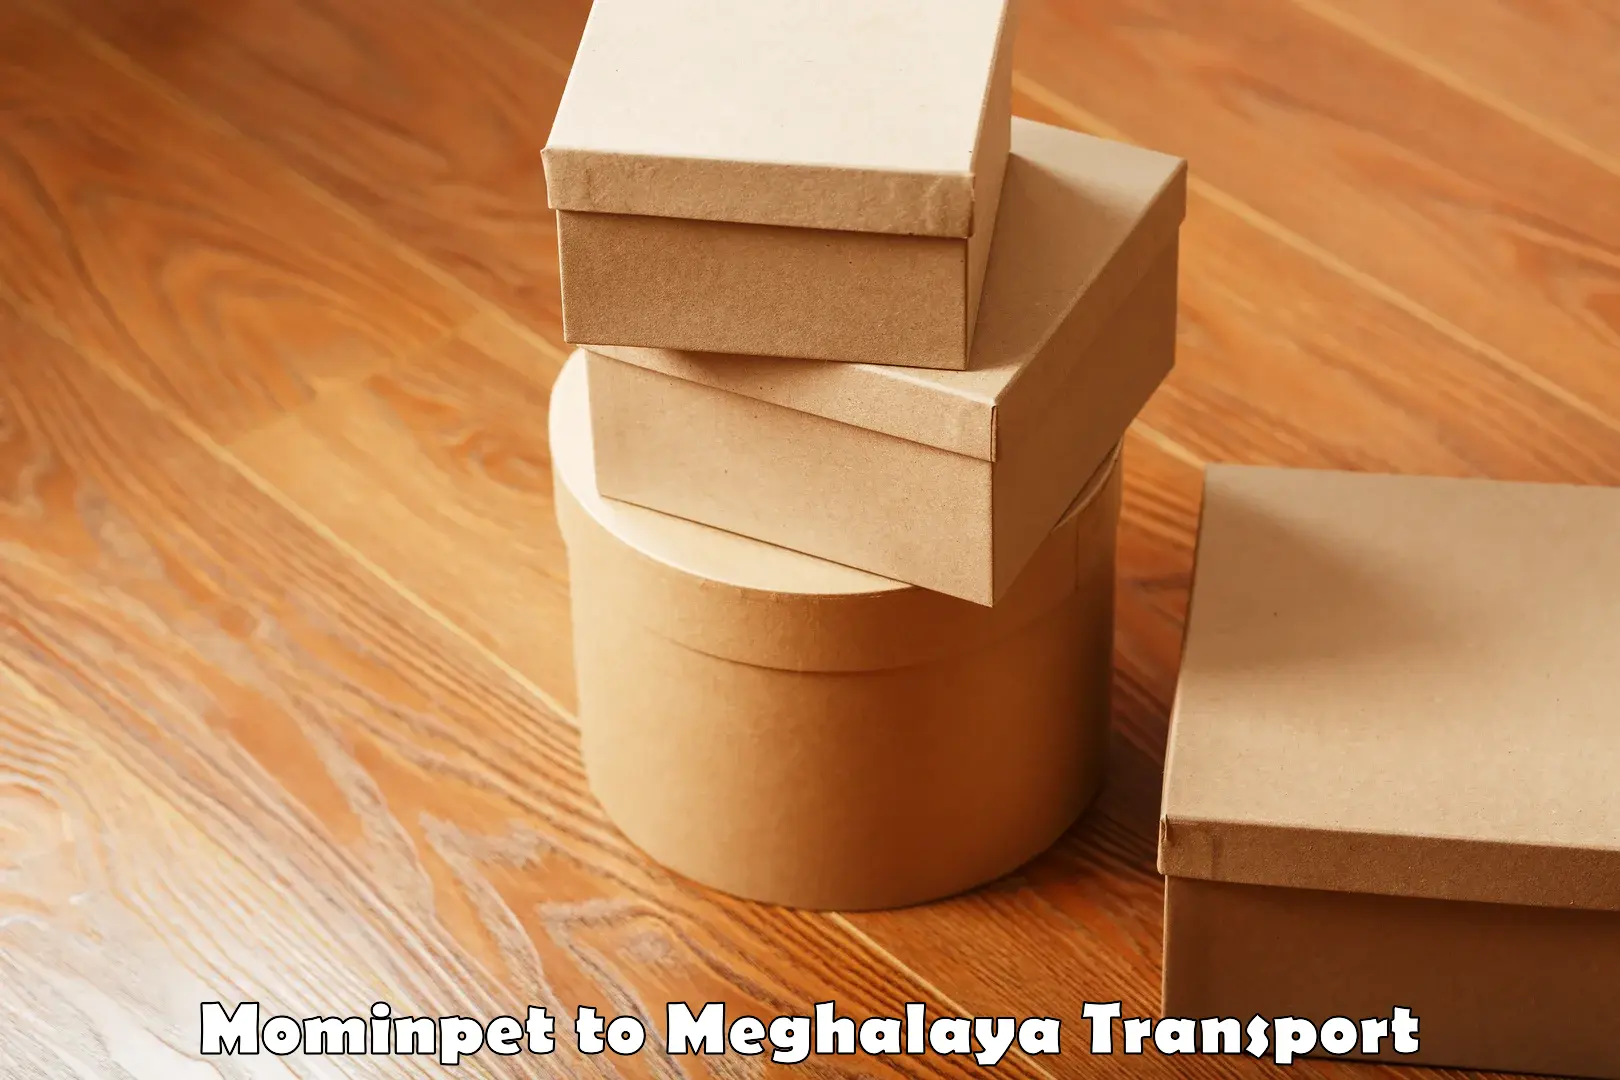 Goods delivery service Mominpet to Meghalaya